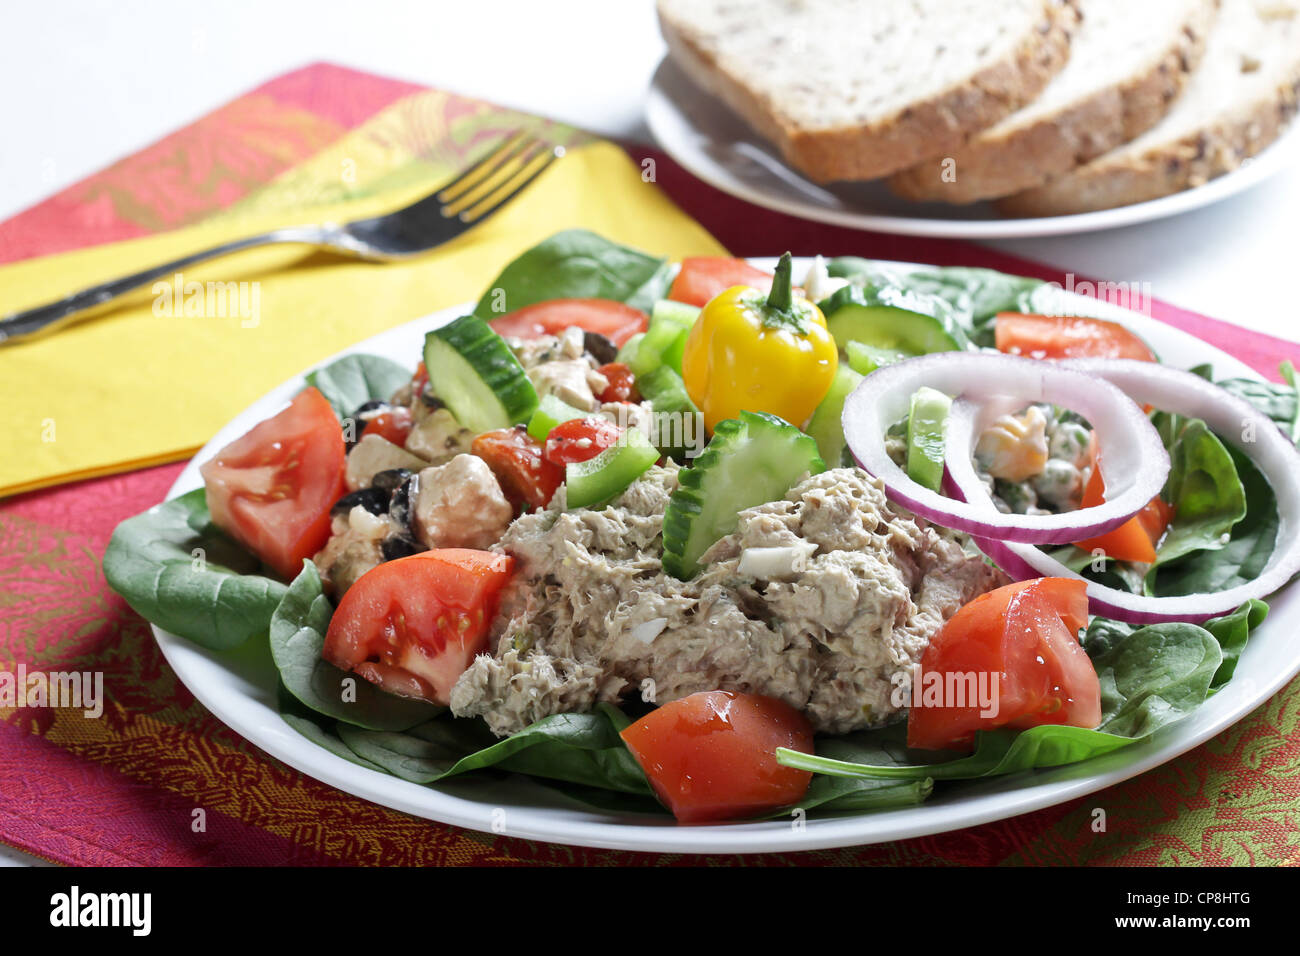 A luncheon salad plate of tuna and feta cheese salads with garnishes of tomatoes, cucumbers and onions with whole grain bread. Stock Photo